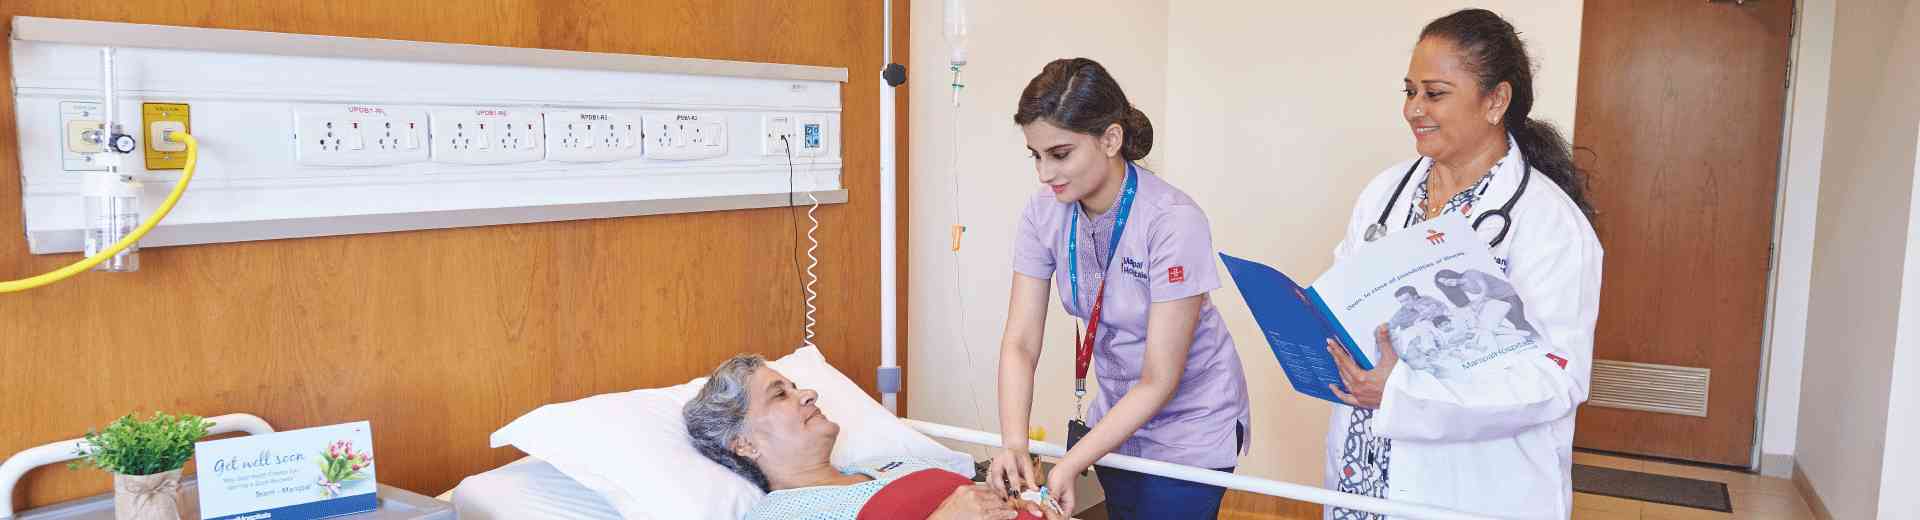 Outpatient Inpatient and Emergency services in Baner, Pune